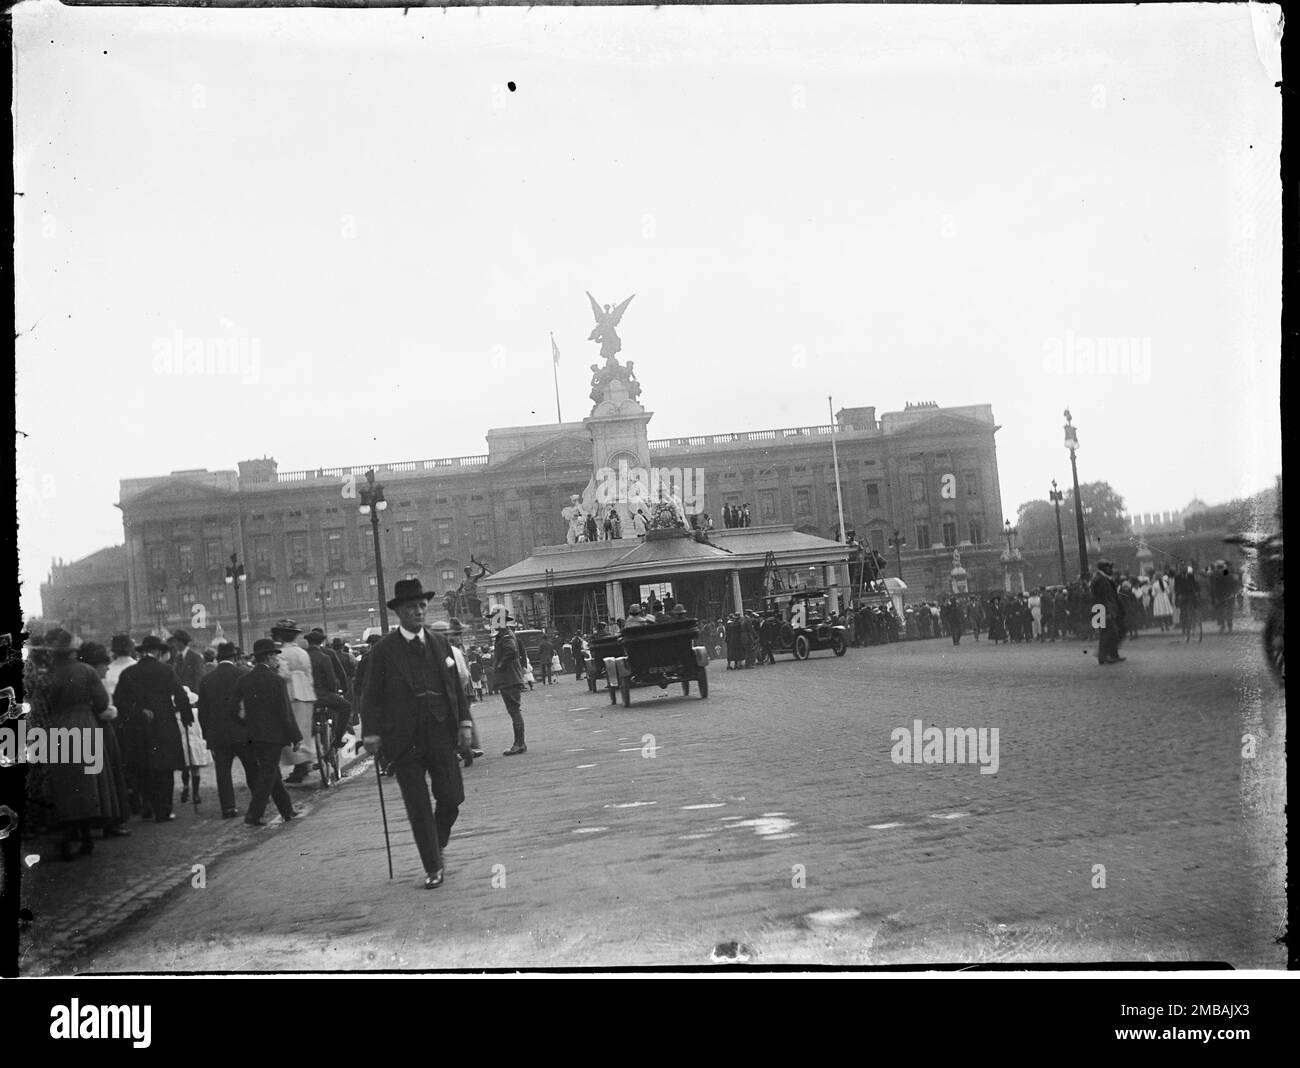 The Mall, City of Westminster, Greater London Authority, 1919. A view of pedestrians and cars on The Mall in front of Buckingham Palace. In the centre is the King's Stand erected around the Queen Victoria Memorial.This photograph is one of a group the photographer took on the 18th, 21st &amp; 23rd July 1919 recording the peace decorations that had been erected in London for Peace Day and the Victory March, 19th July 1919, in celebration of the end of World War 1. Stock Photo